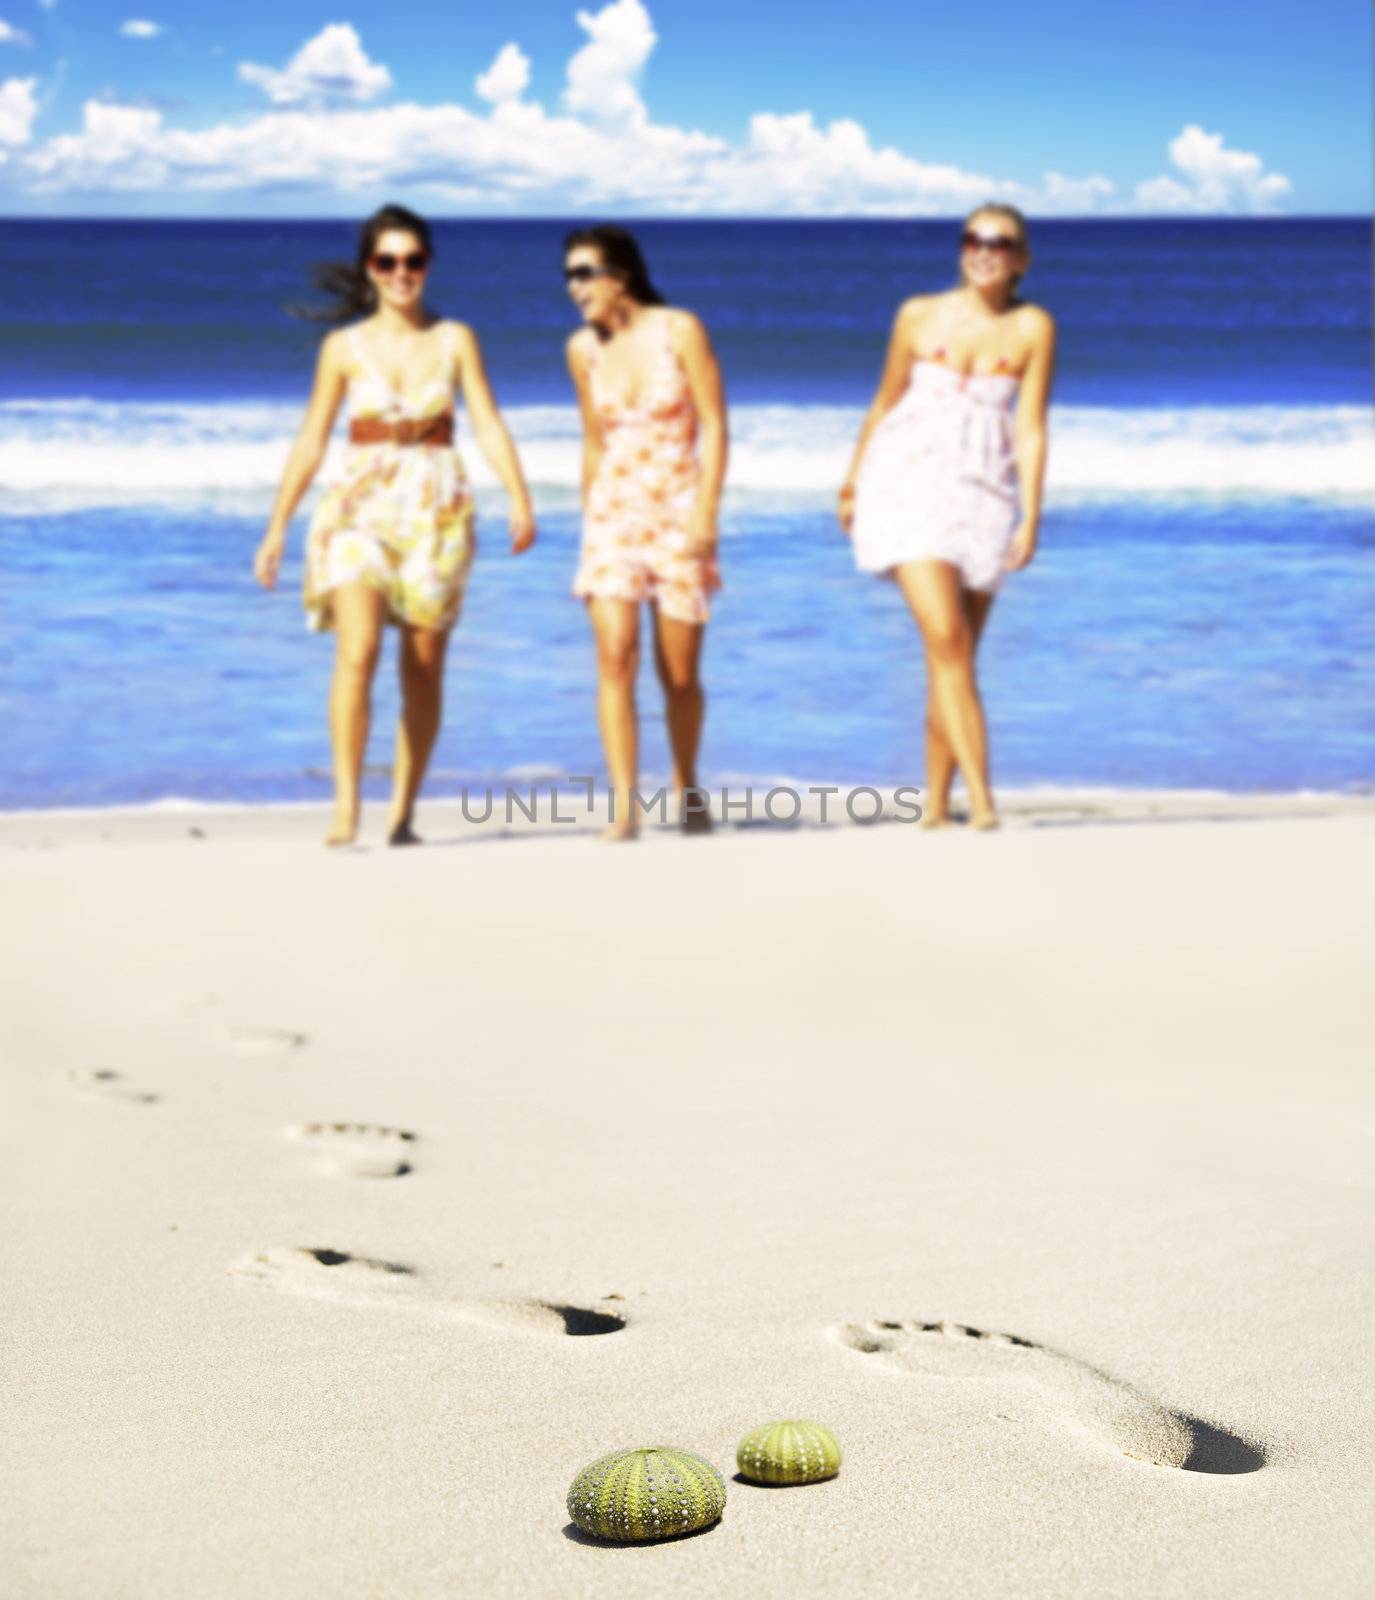 Sea urchin shells on the beach with three young women in the background by tish1